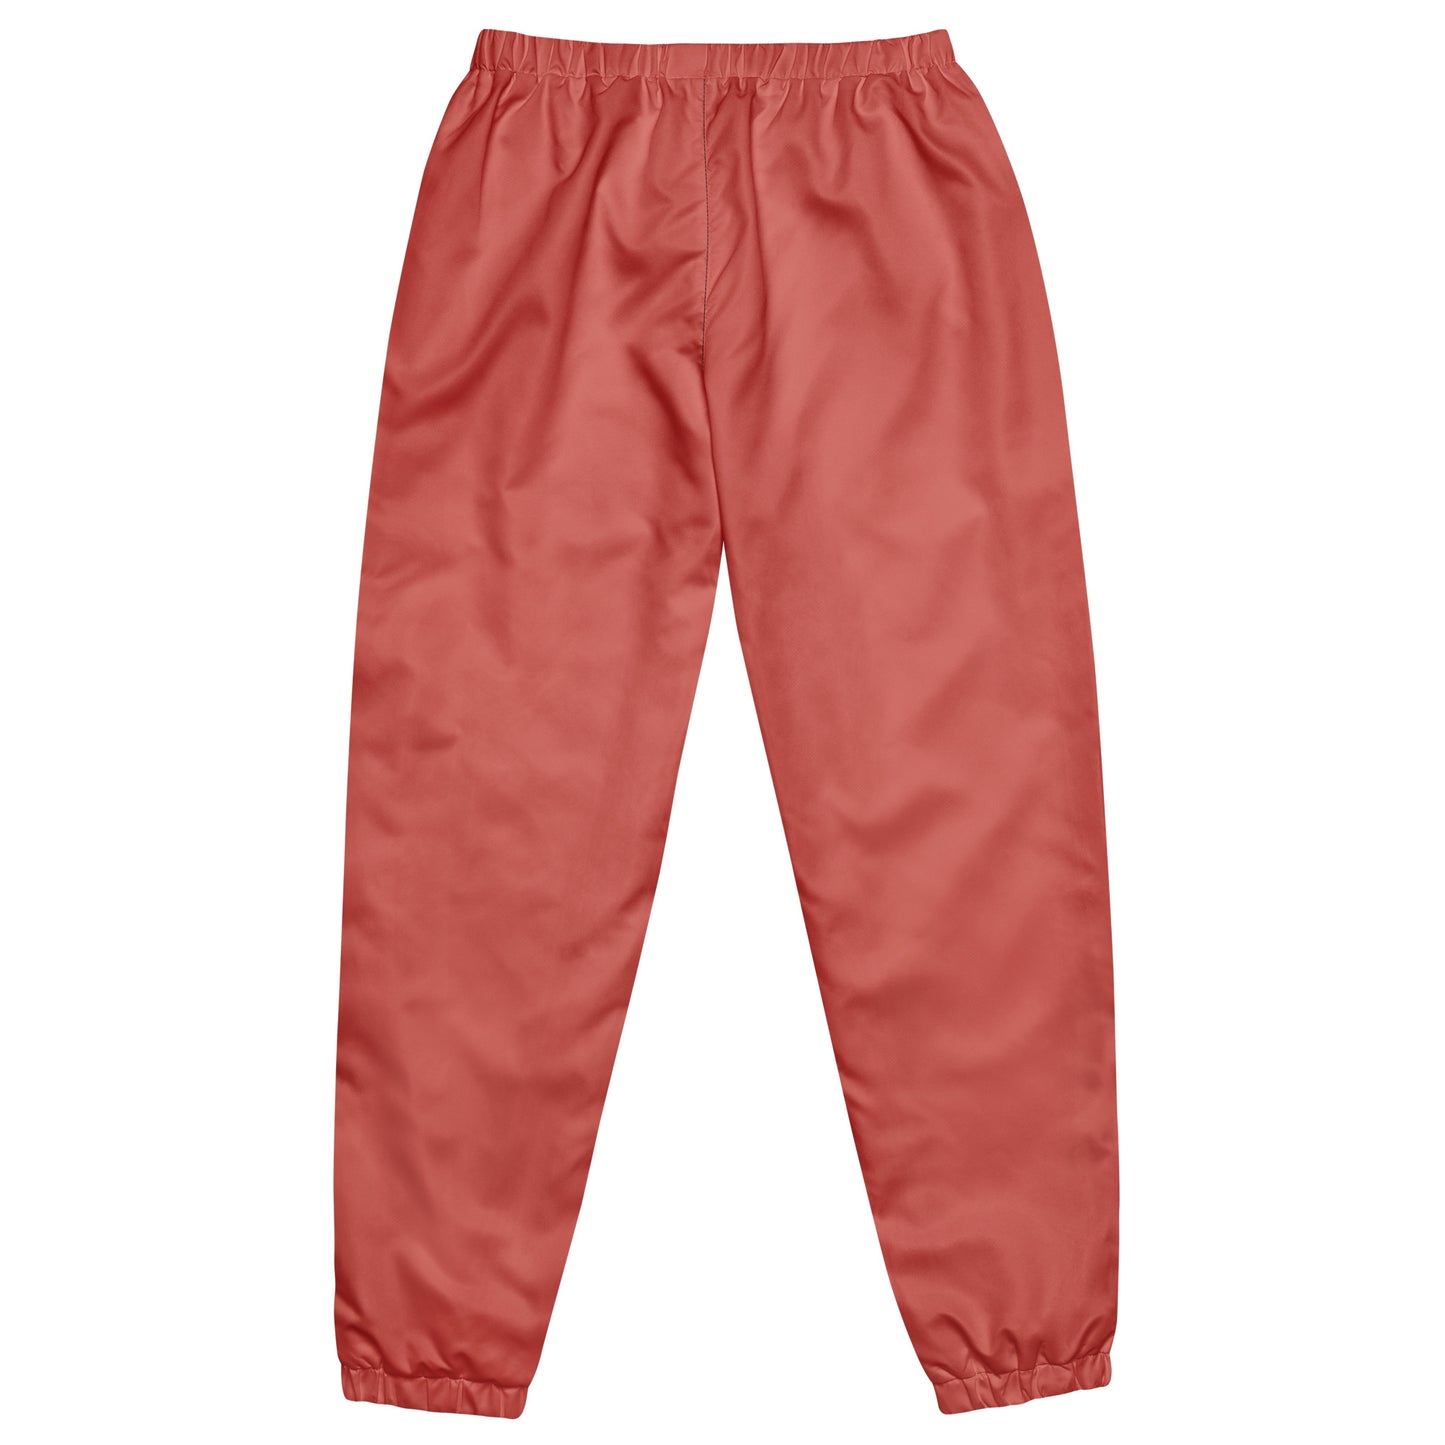 Heart - Inspired By Taylor Swift - Sustainably Made Unisex track pants